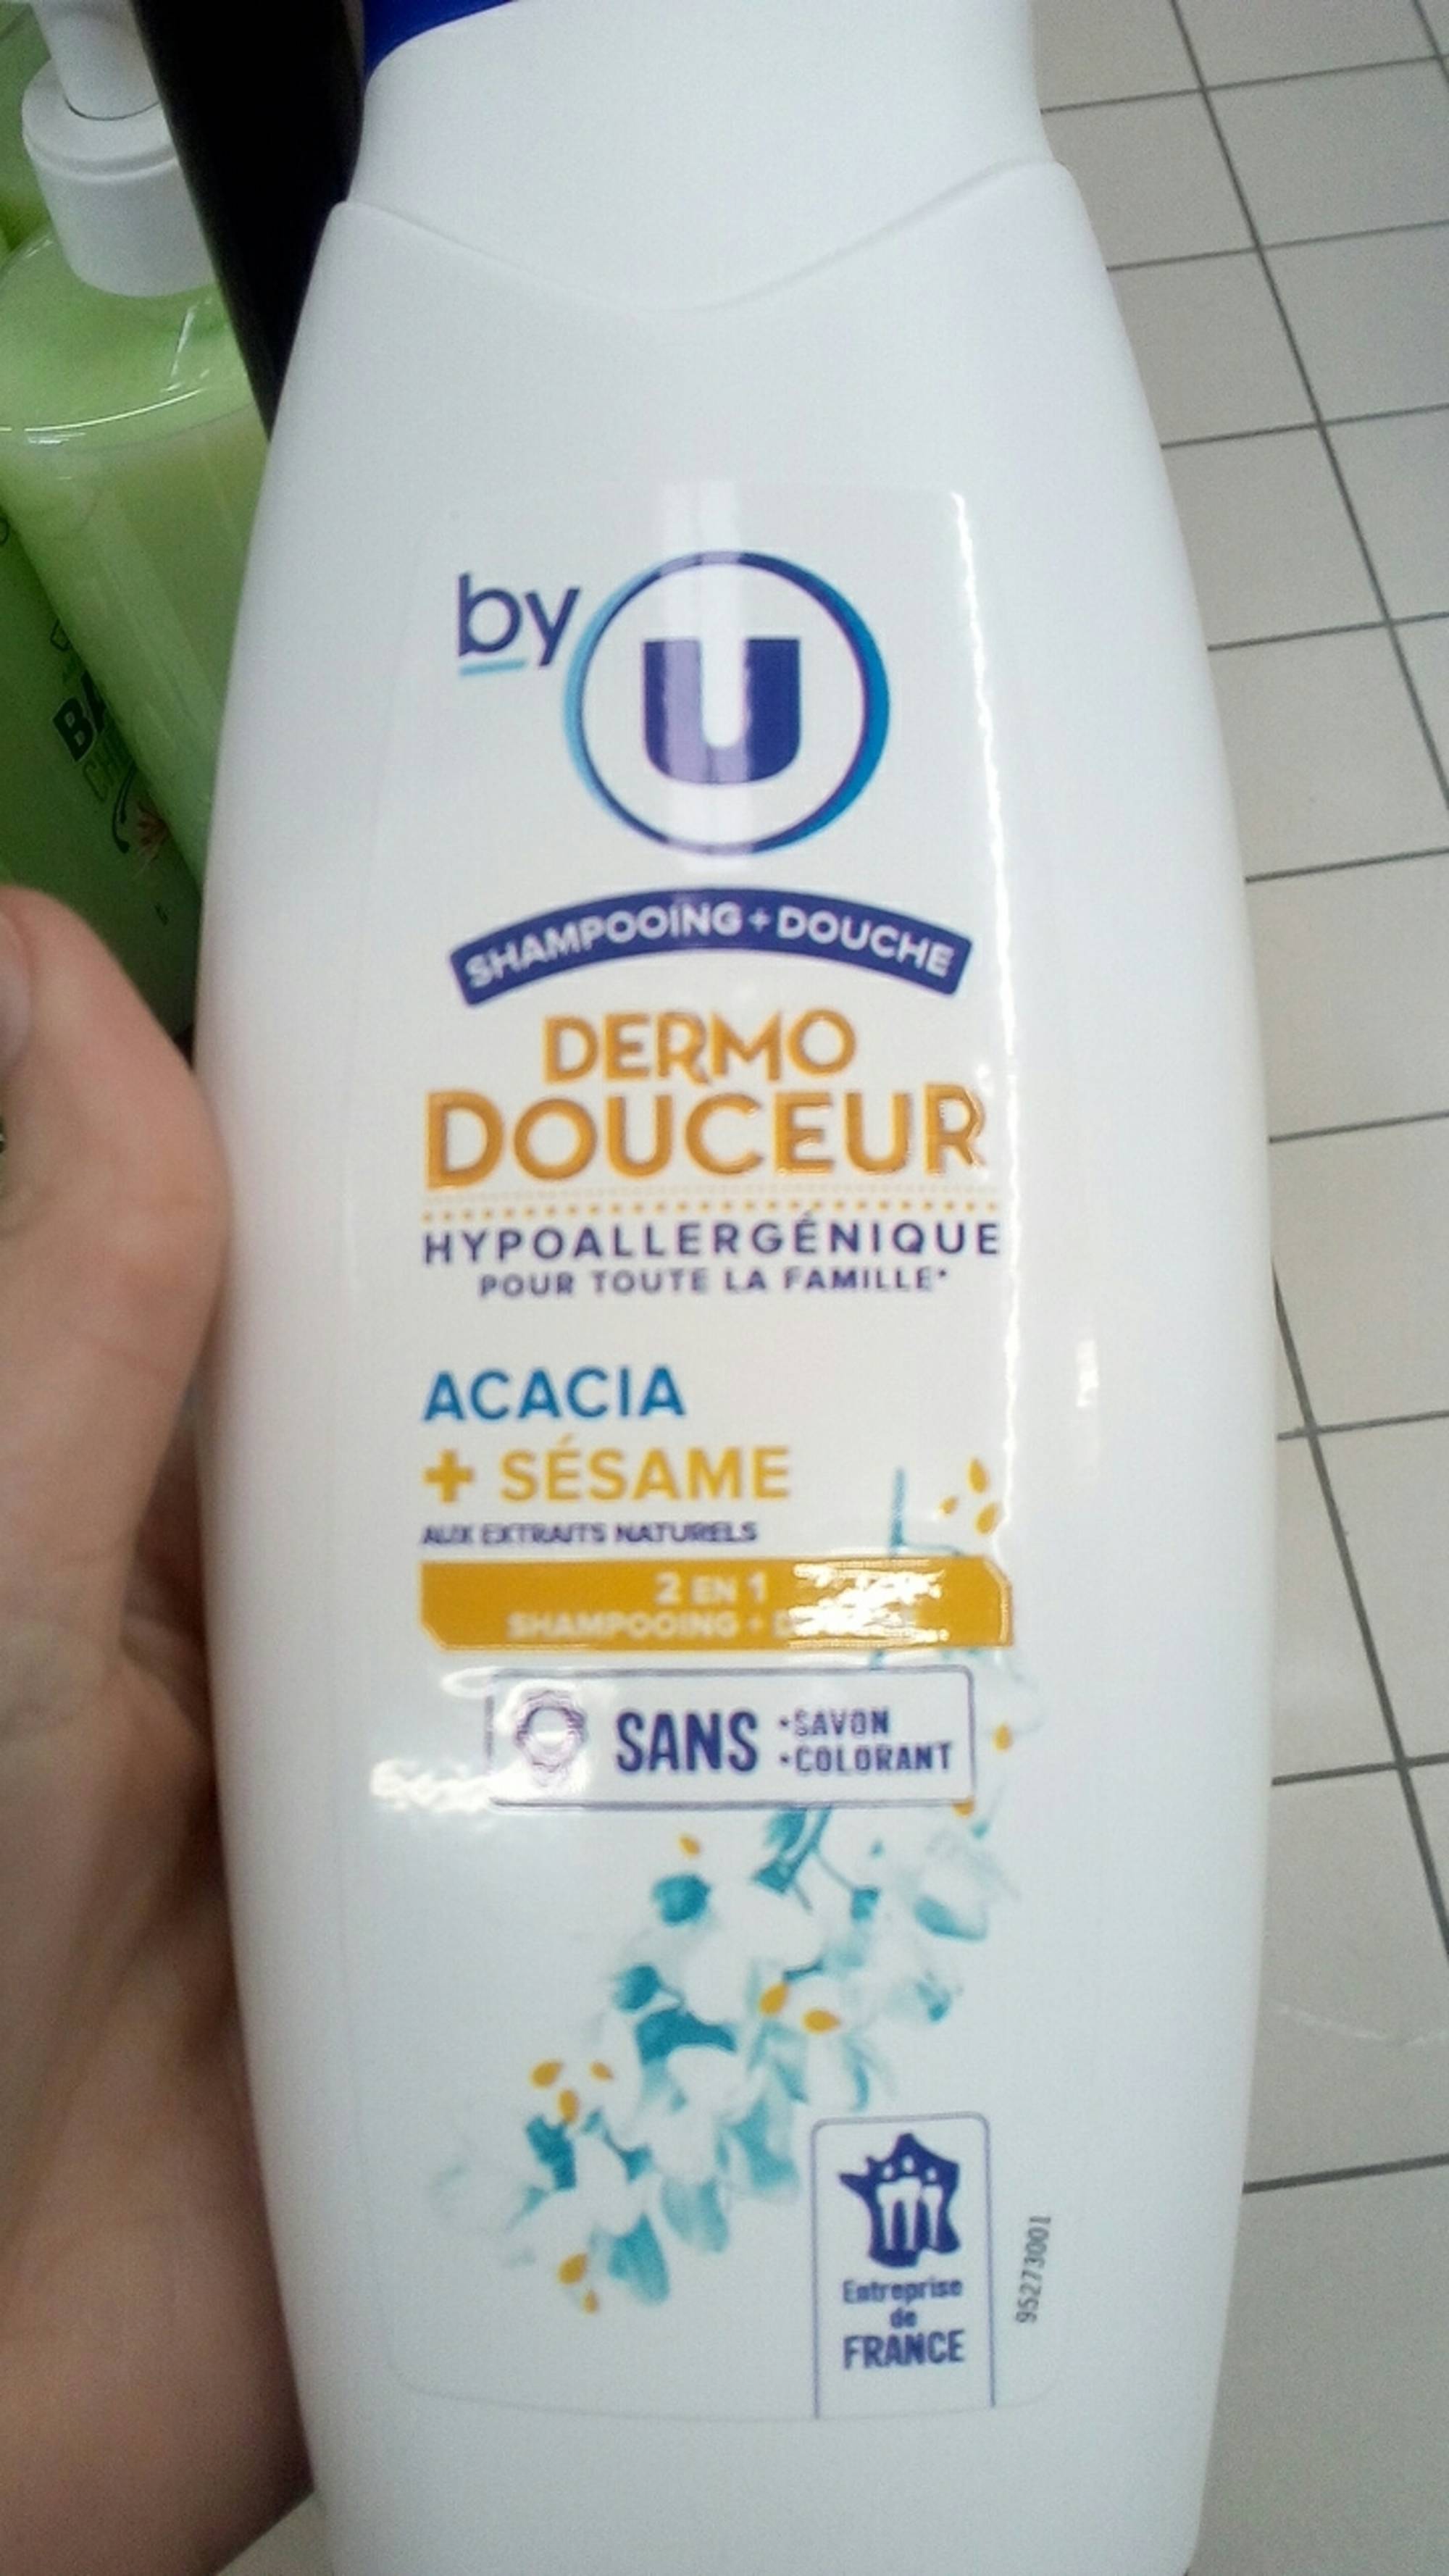 BY U - Dermo douceur - Shampooing douche